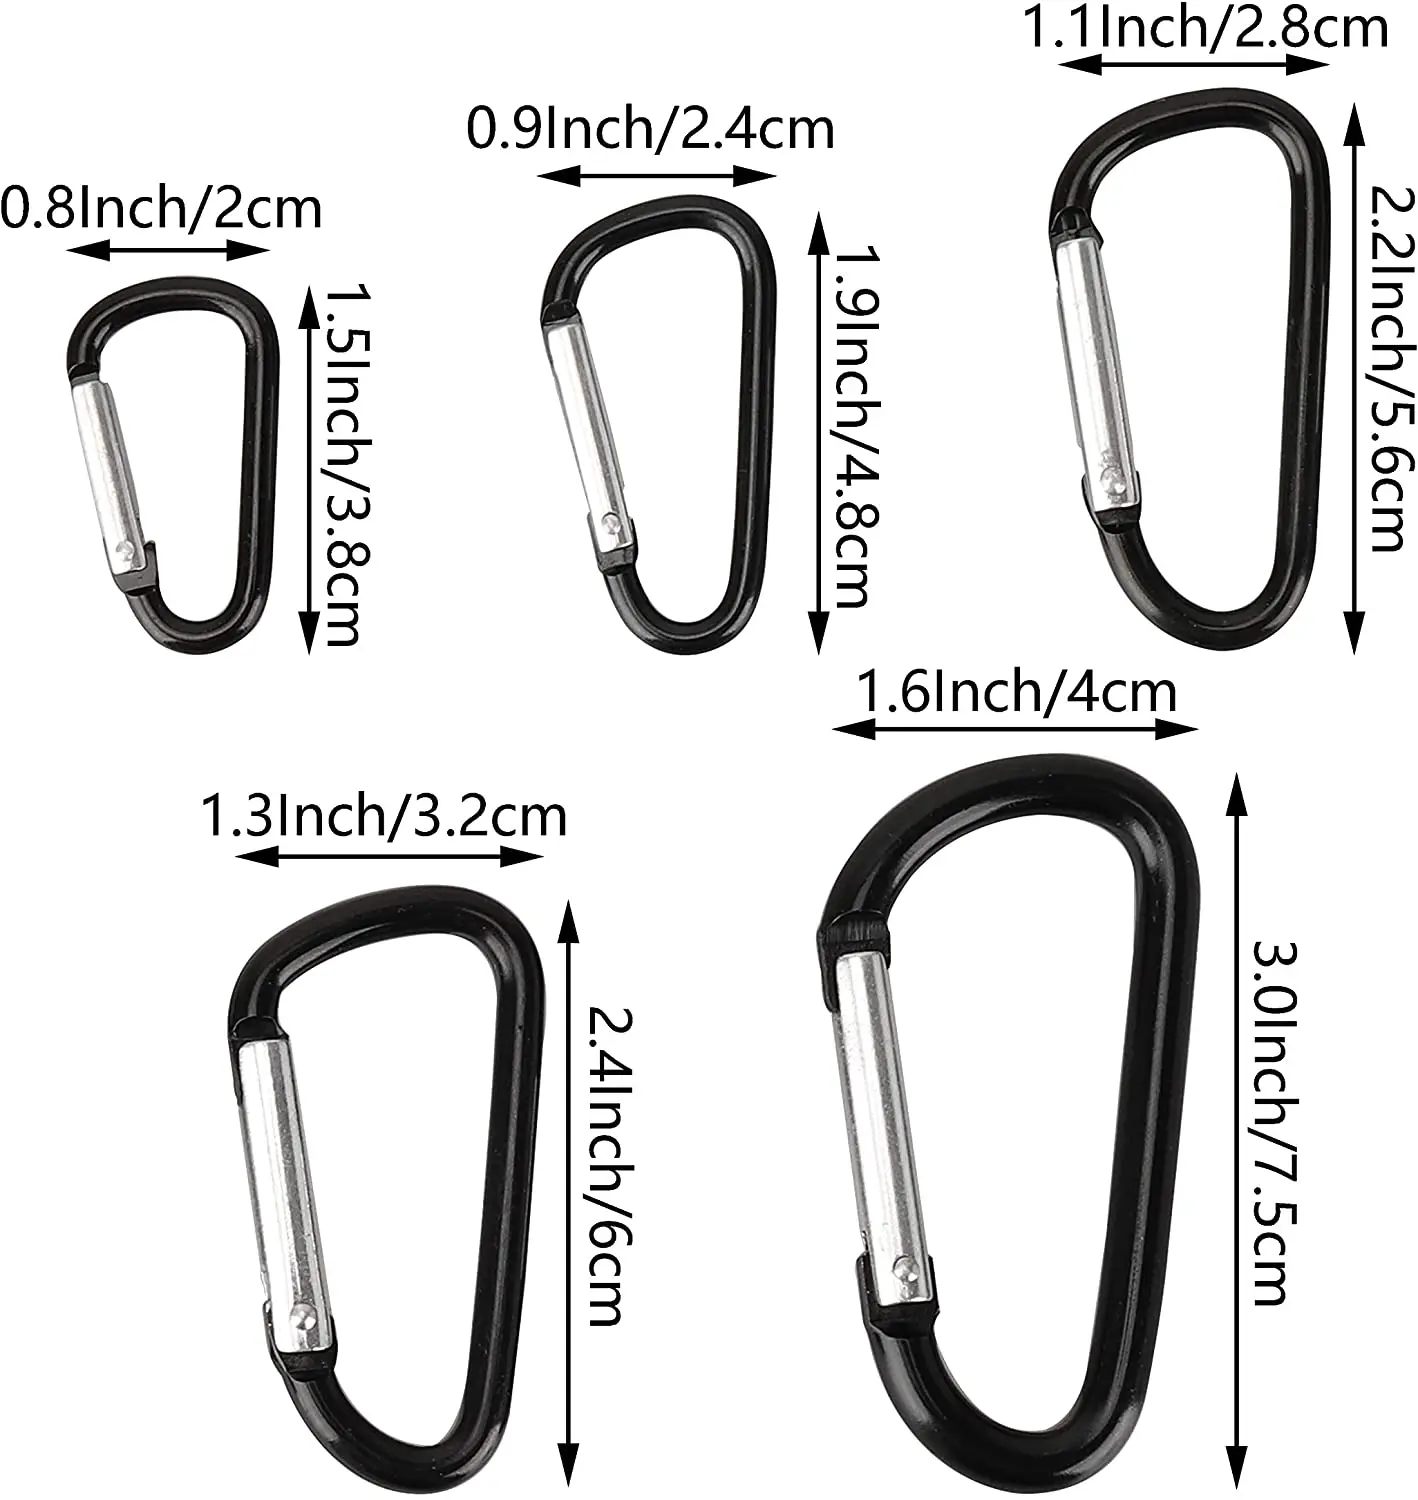 10 Pcs Swatom Aluminum Alloy Carabiner Clip 1.5/1.9/2.2/2.4/3 Inches Carabiners Spring Snap Hook Keyring for Traveling Hiking Camping Keychains Outdoor Accessories Black 